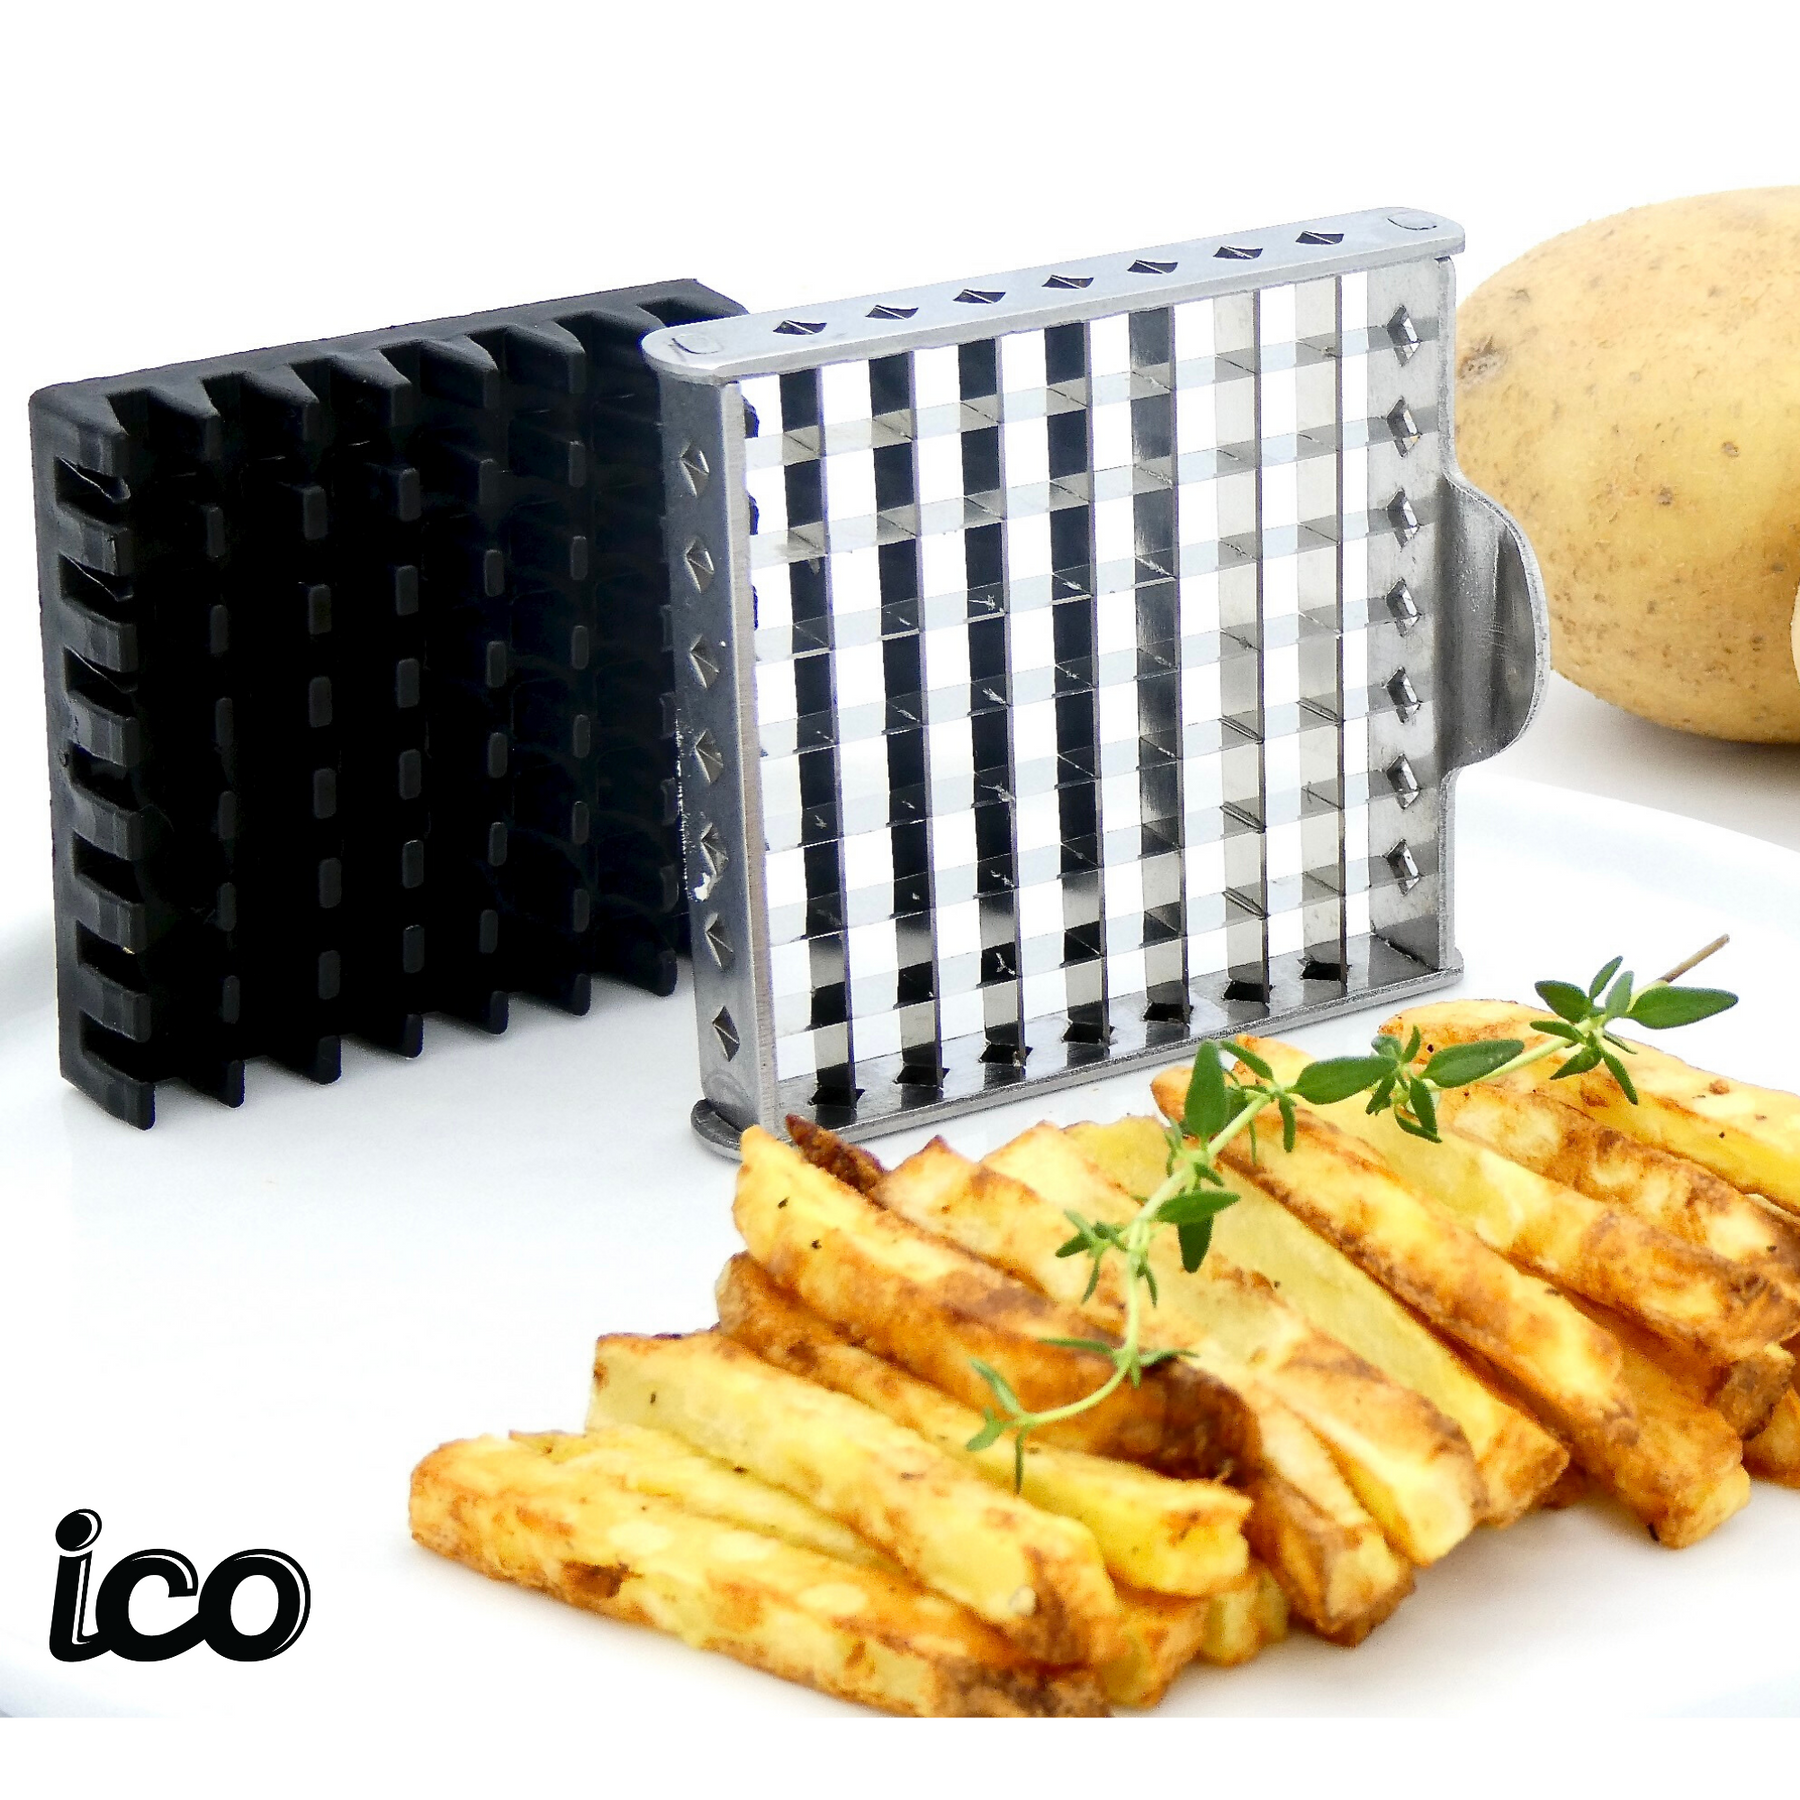 ICO Potato Cutter and Vegetable Dicer with Stainless Steel Blade & Handle